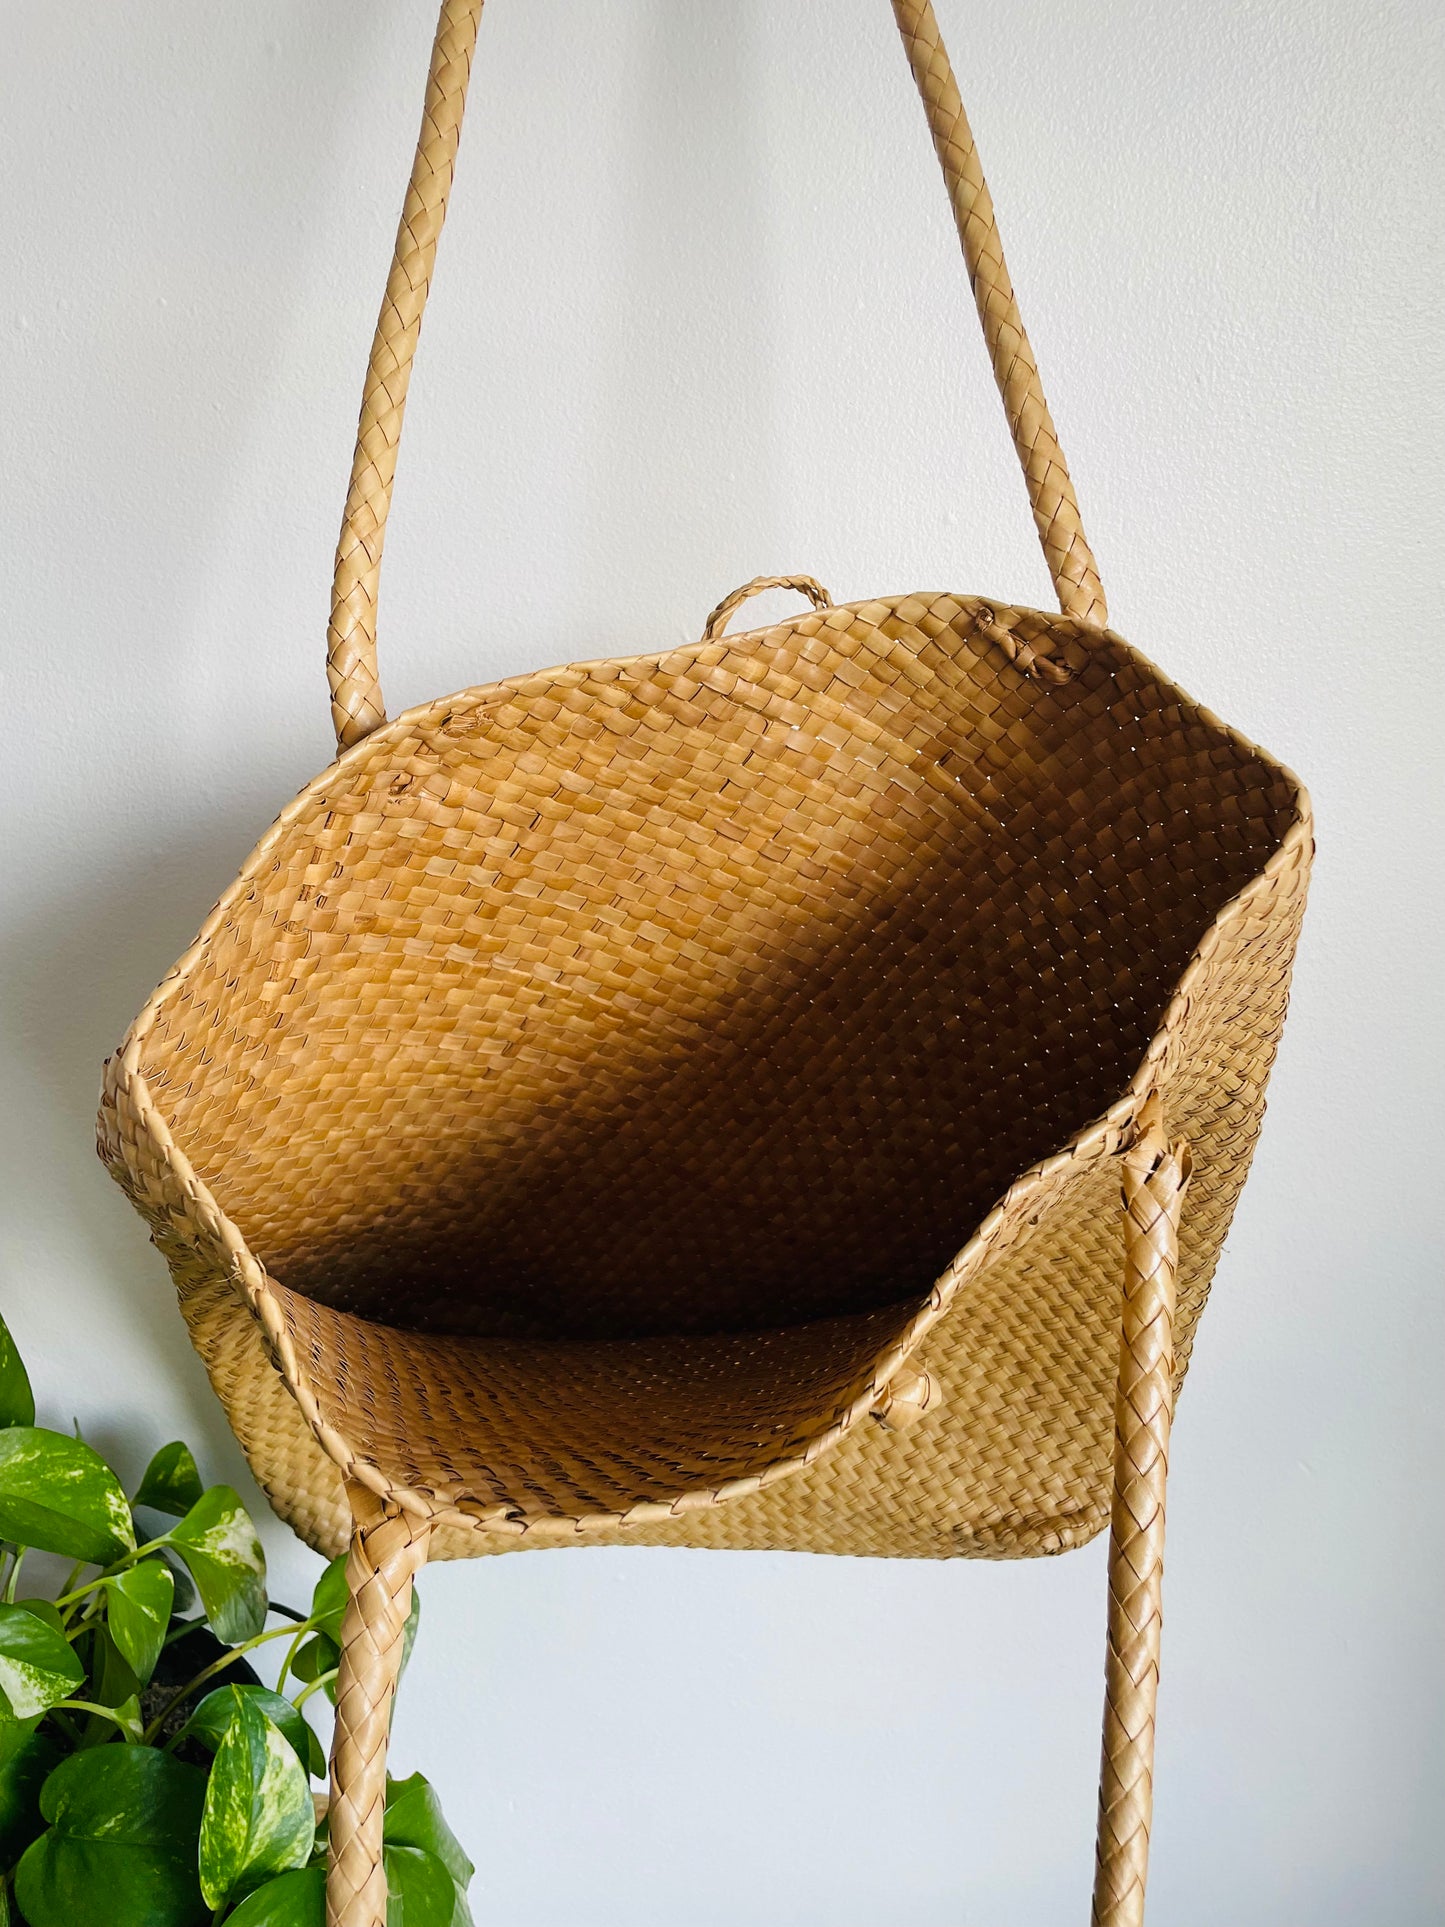 Woven Straw Purse Bag with Handles & Buckle